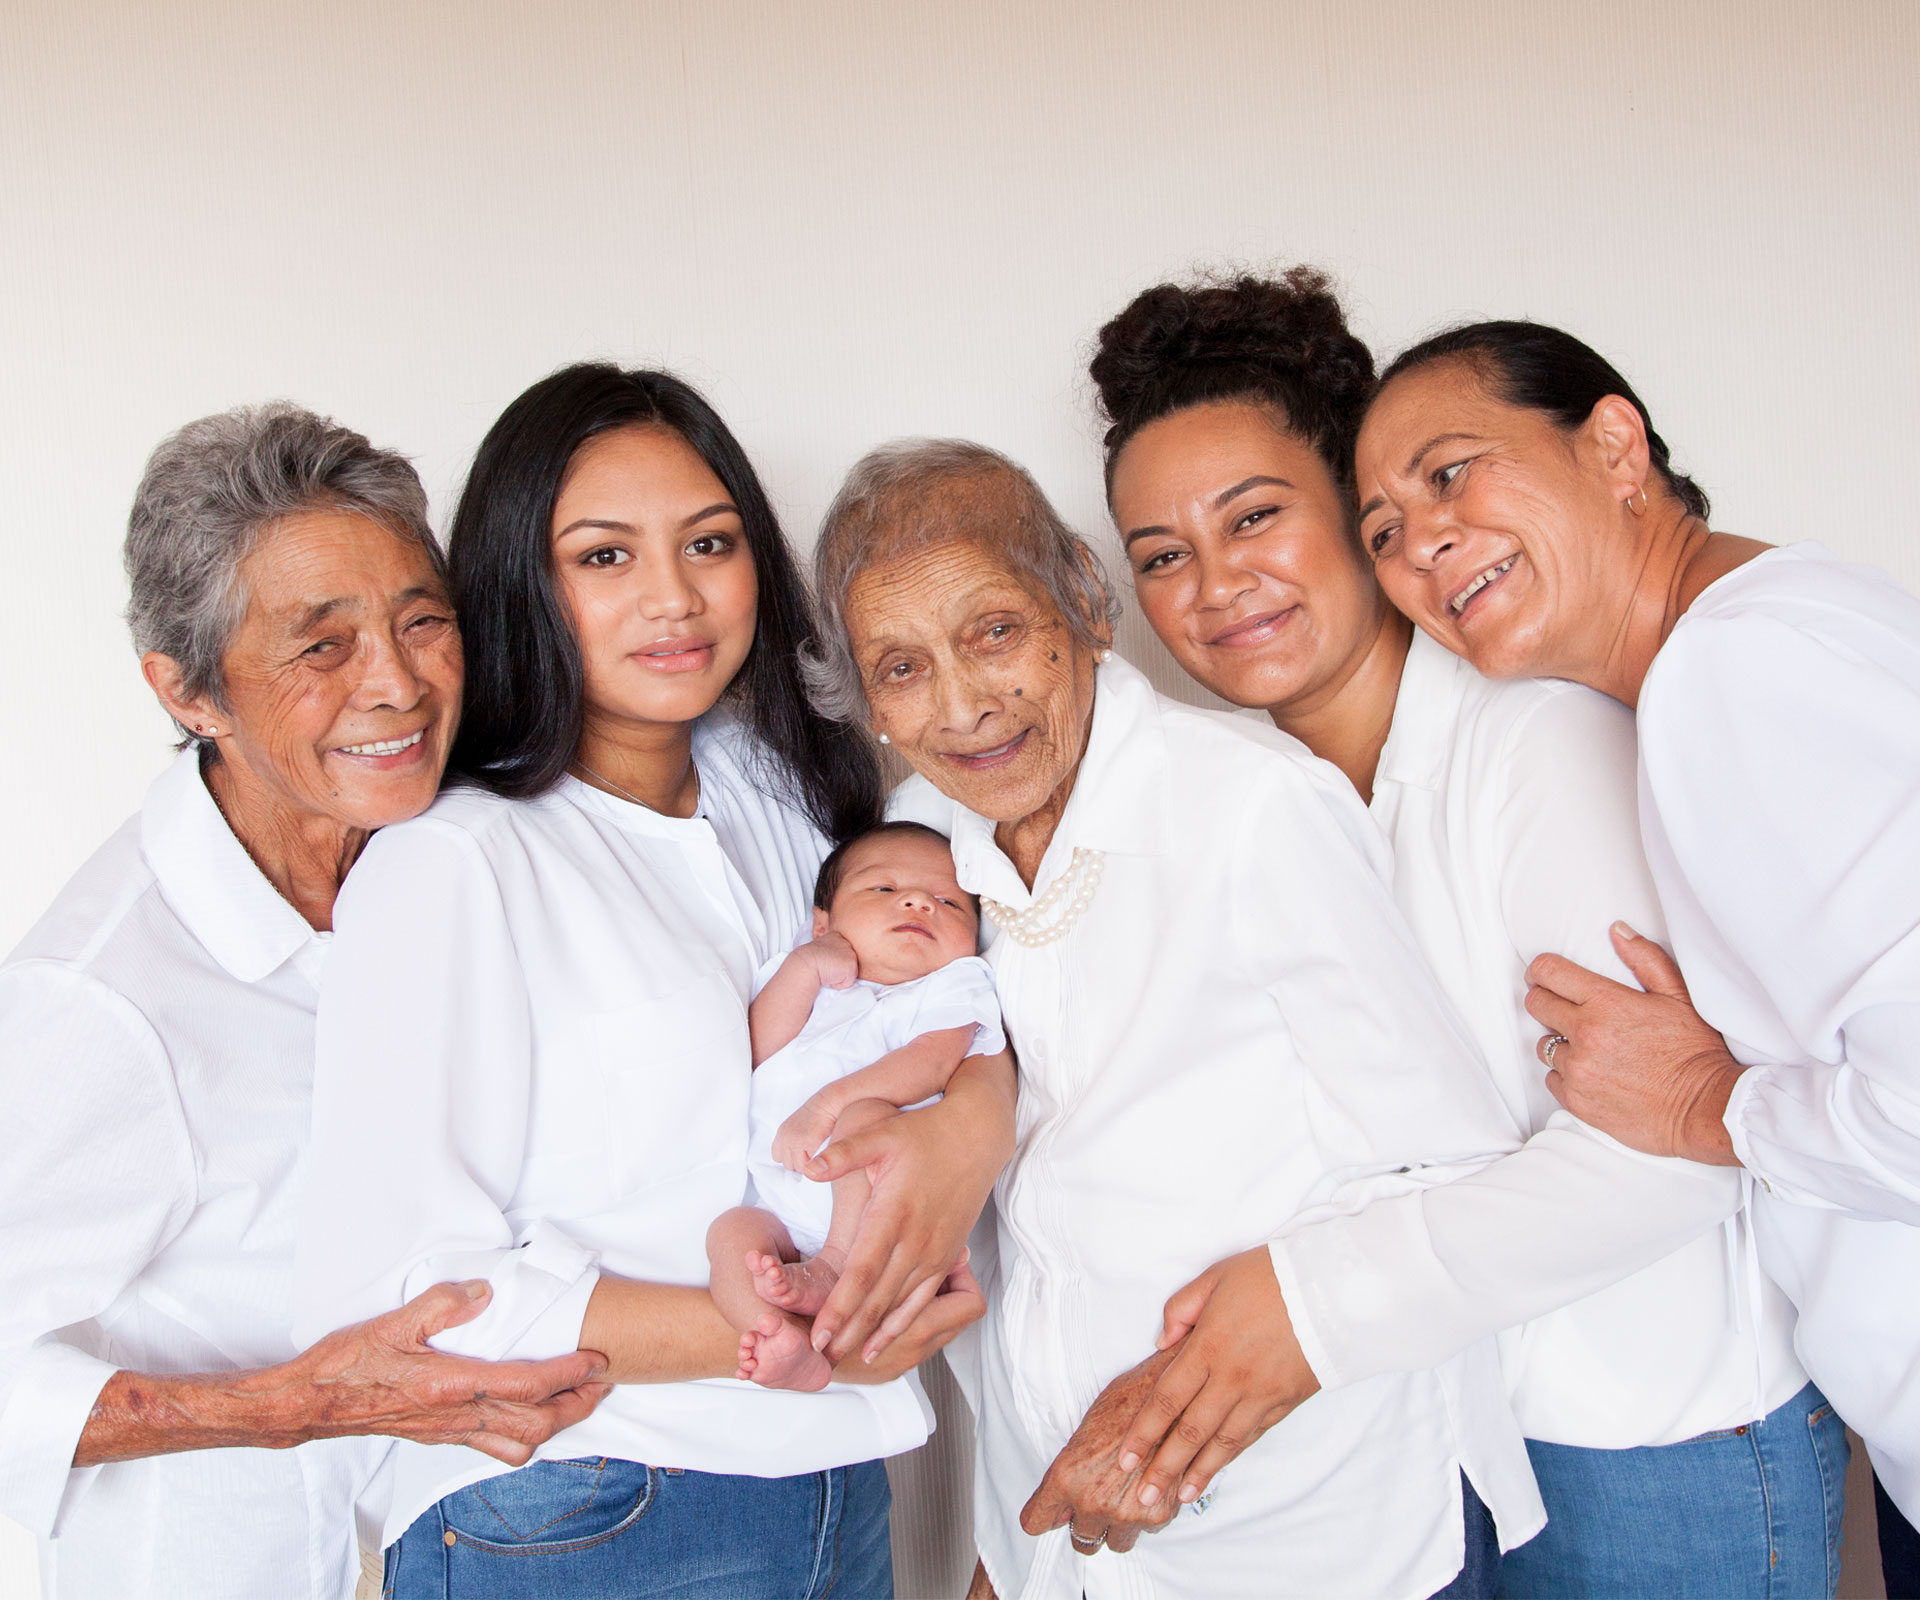 Six generations reunite in one room for heartwarming photos